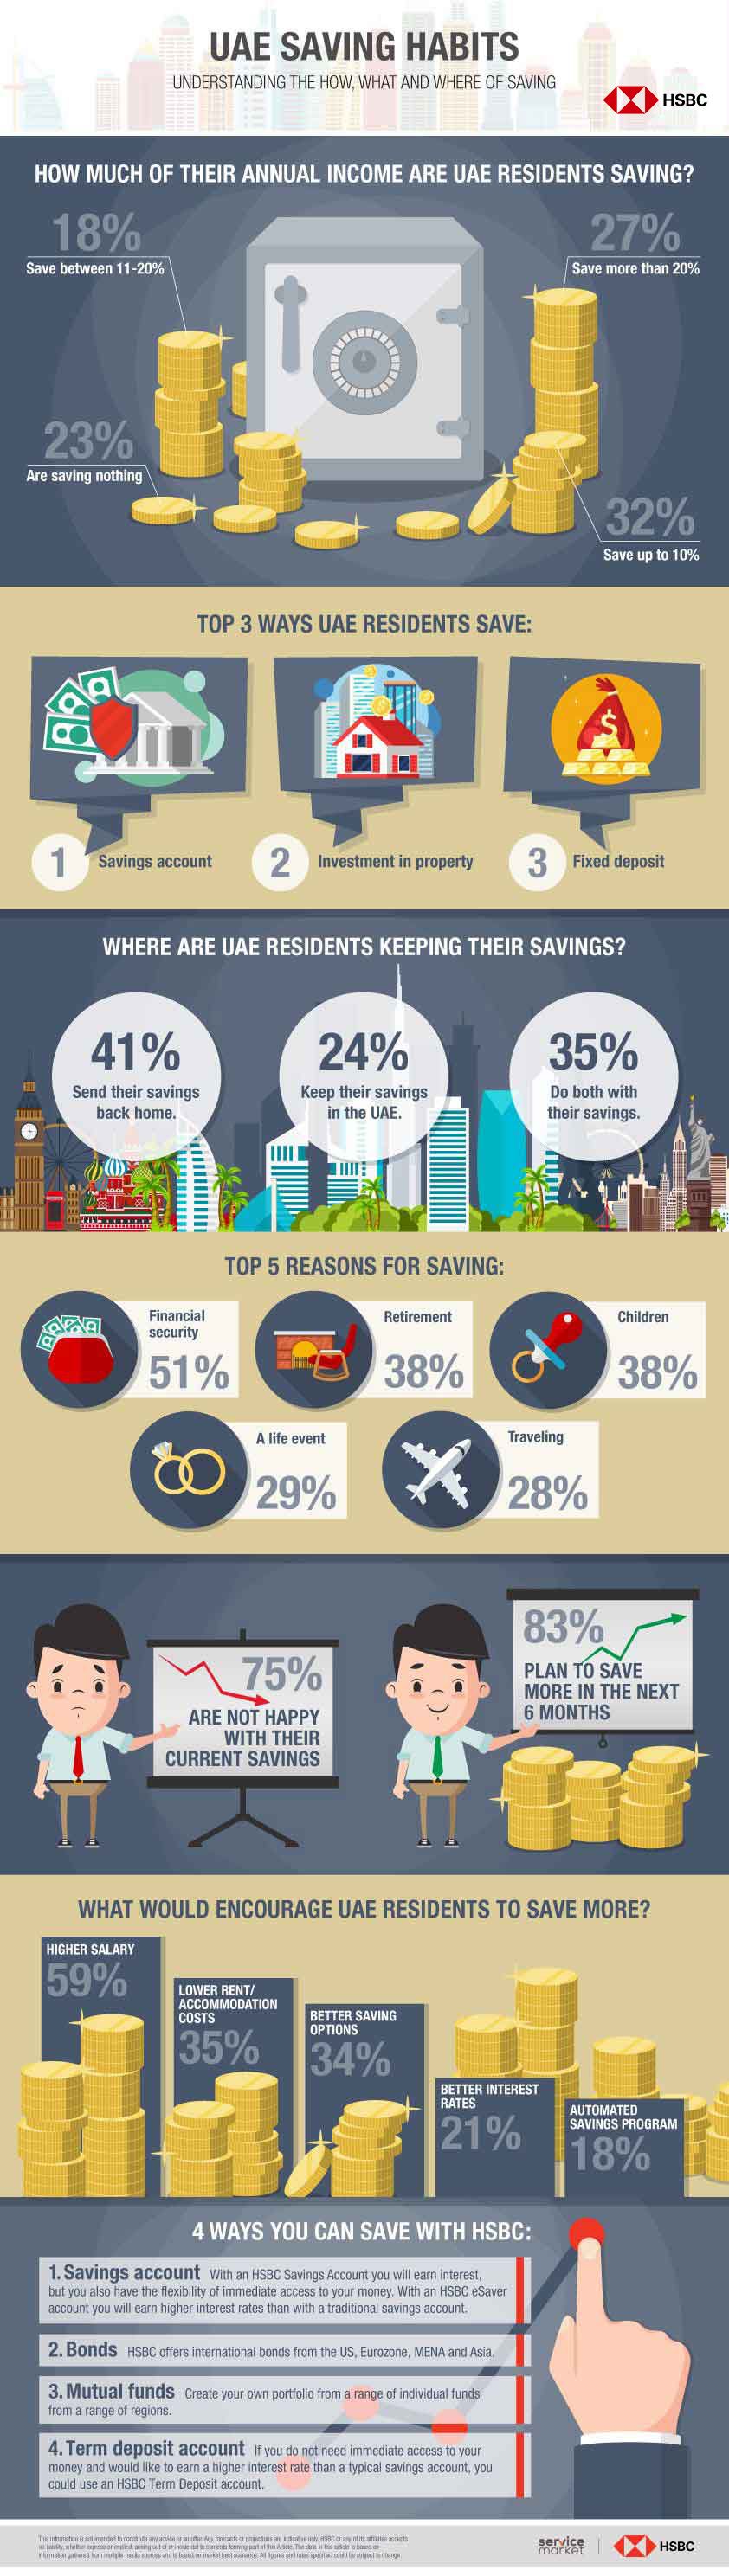 How Much Are UAE Residents Really Saving - Infographic